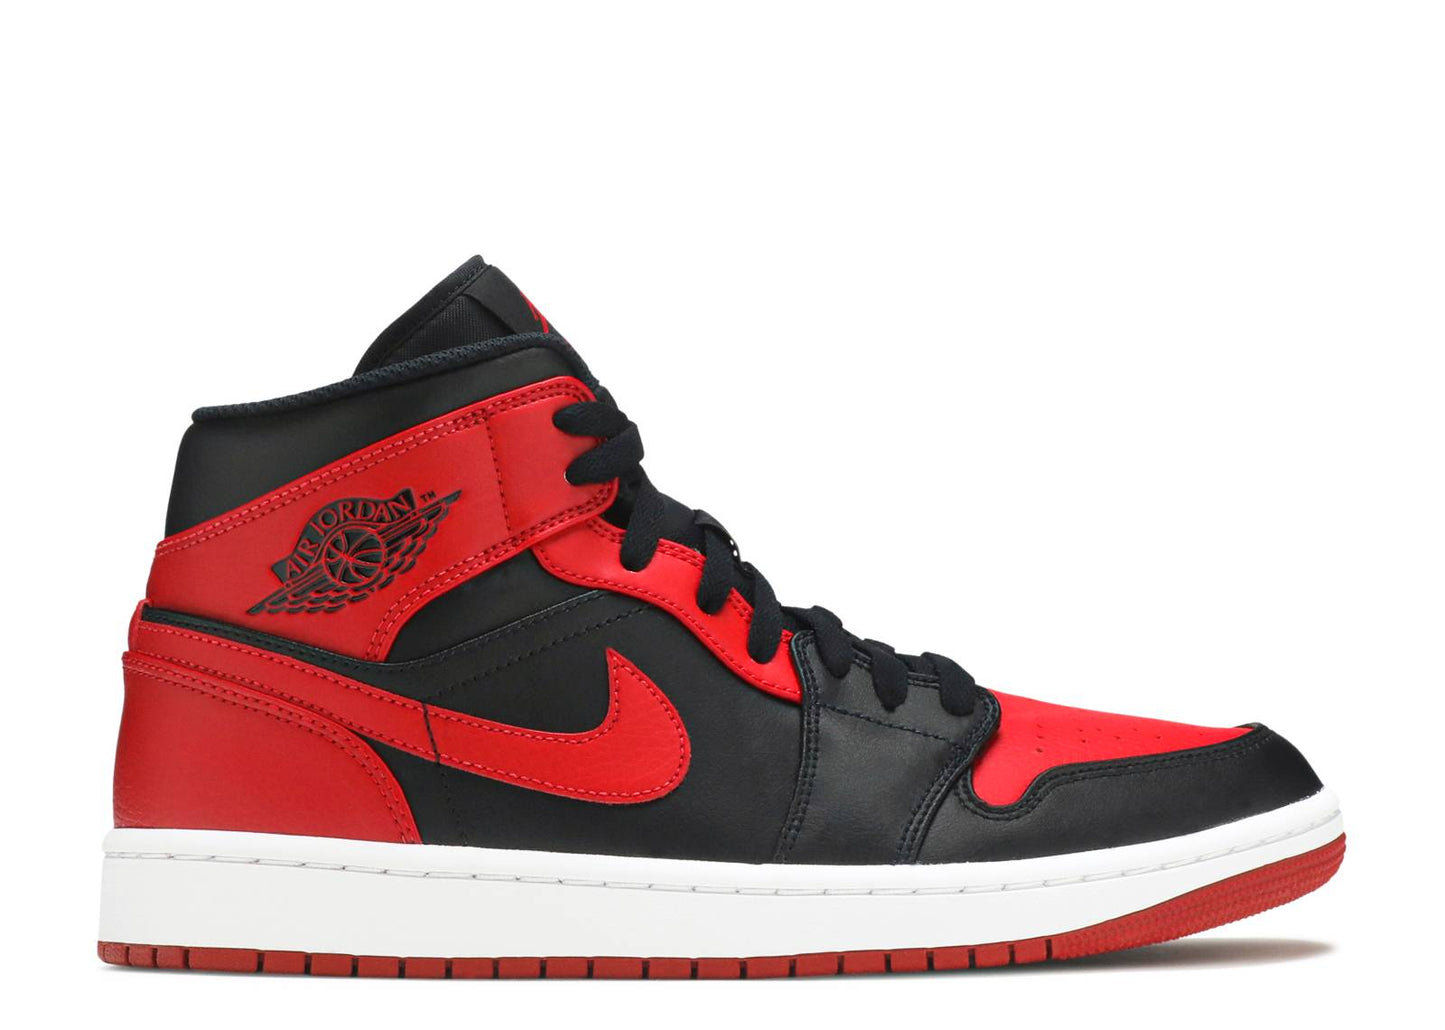 Jordan 1 Mid Banned (Preowned)